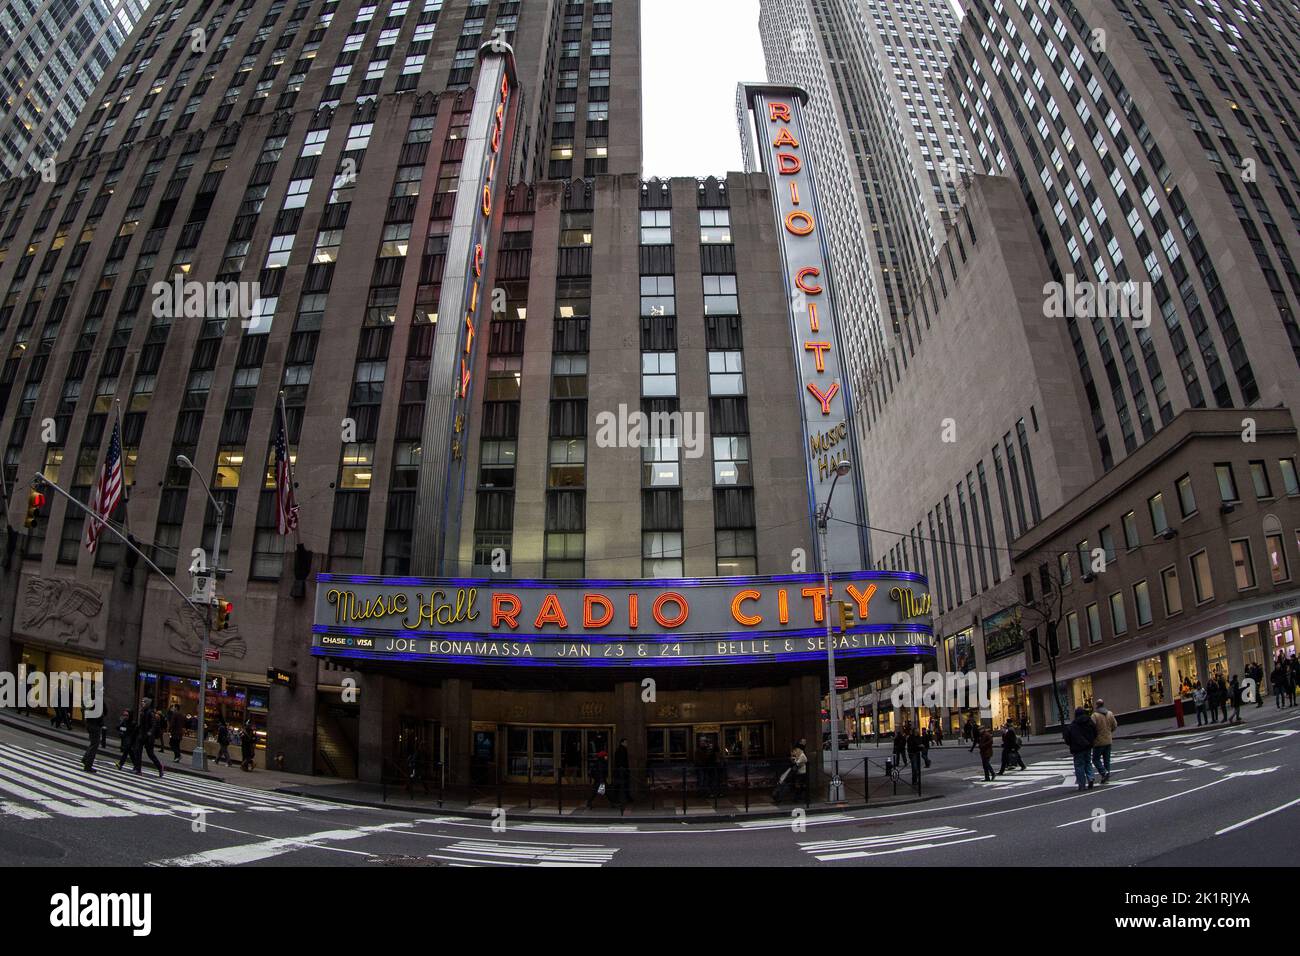 The entrance of the Radio City Music Hall Stock Photo